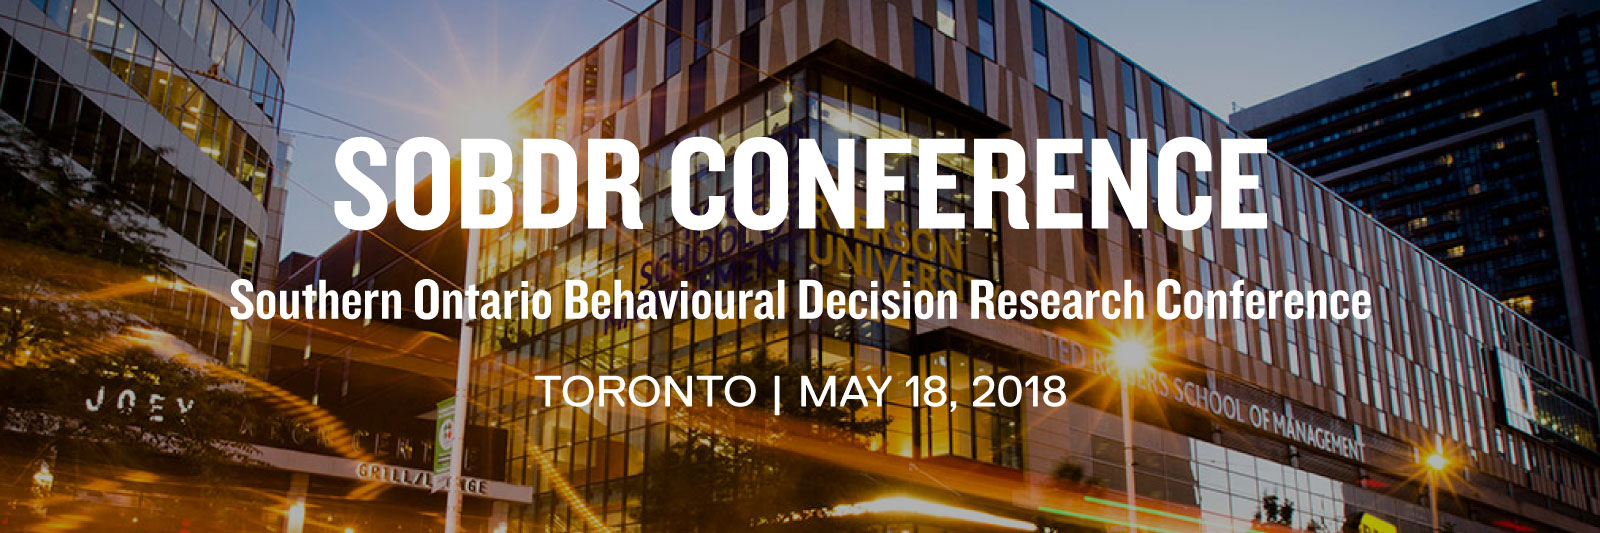 Southern Ontario Behavioural Decision Research Conference. Toronto, May 18, 2018.